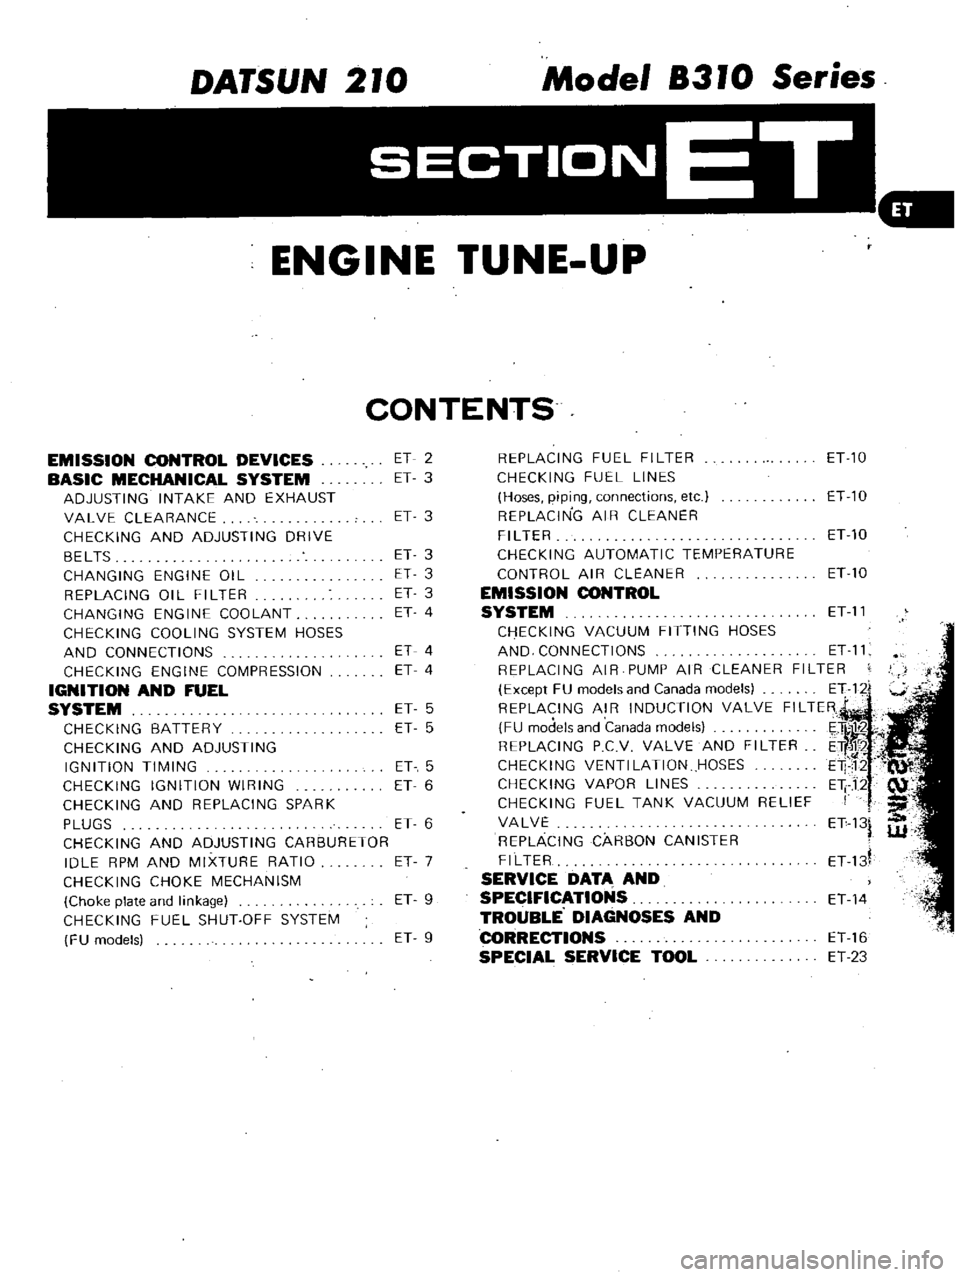 DATSUN 210 1979 User Guide 
DATSUN 
210 
Model 
8310 
Series

SECTIONET

ET

ENGINE 
TUNE 
UP

CONTENTS

EMISSION 
CONTROL 
DEVICES

BASIC 
MECHANICAL 
SYSTEM

ADJUSTING 
INTAKE 
AND 
EXHAUST

VALVE 
CLEARANCE

CHECKING 
AND 
A